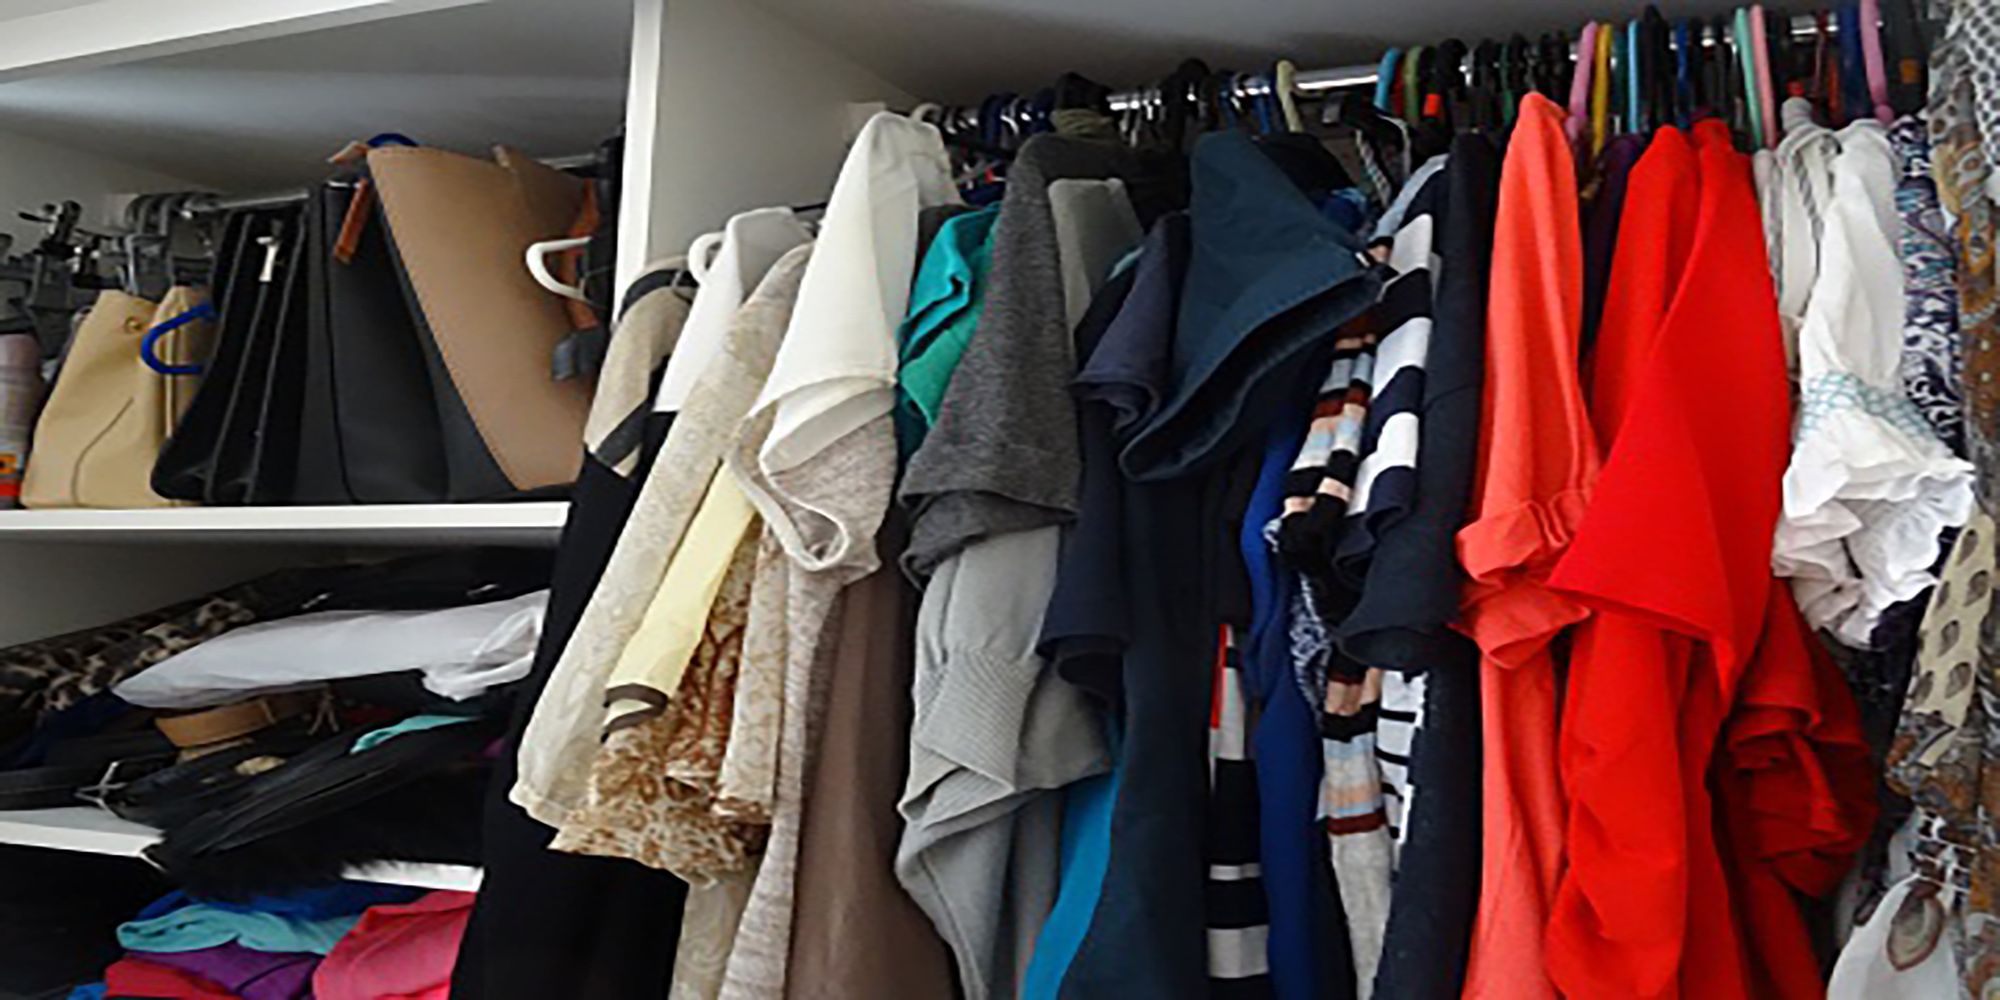 A photo of a closet filled with plenty of clothes, handbags, and other items.